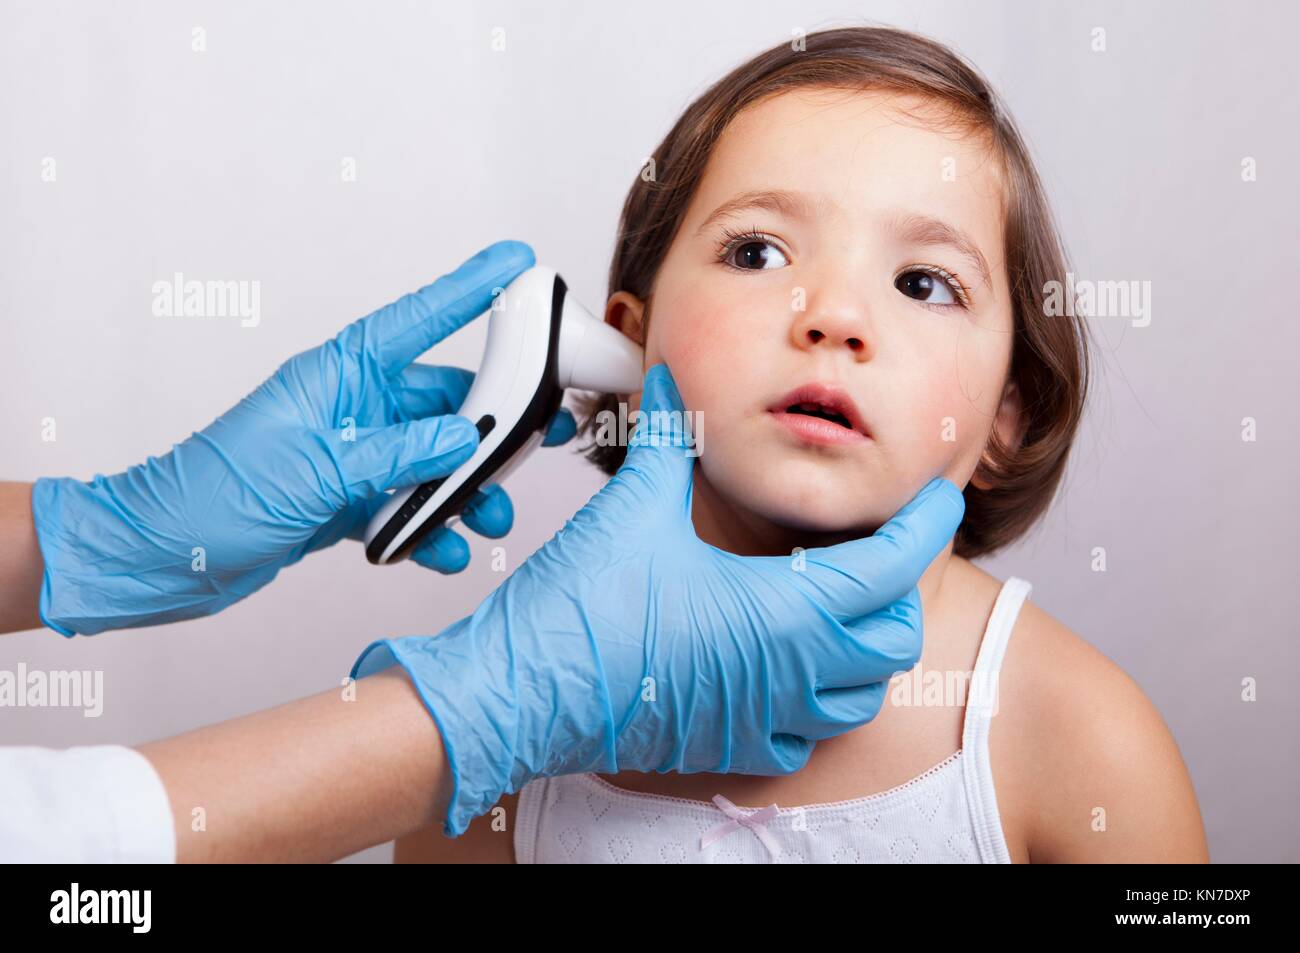 Doctor measuring temperature relaxed little girl with ear talking electronic thermometer. Isolated over white background. Stock Photo